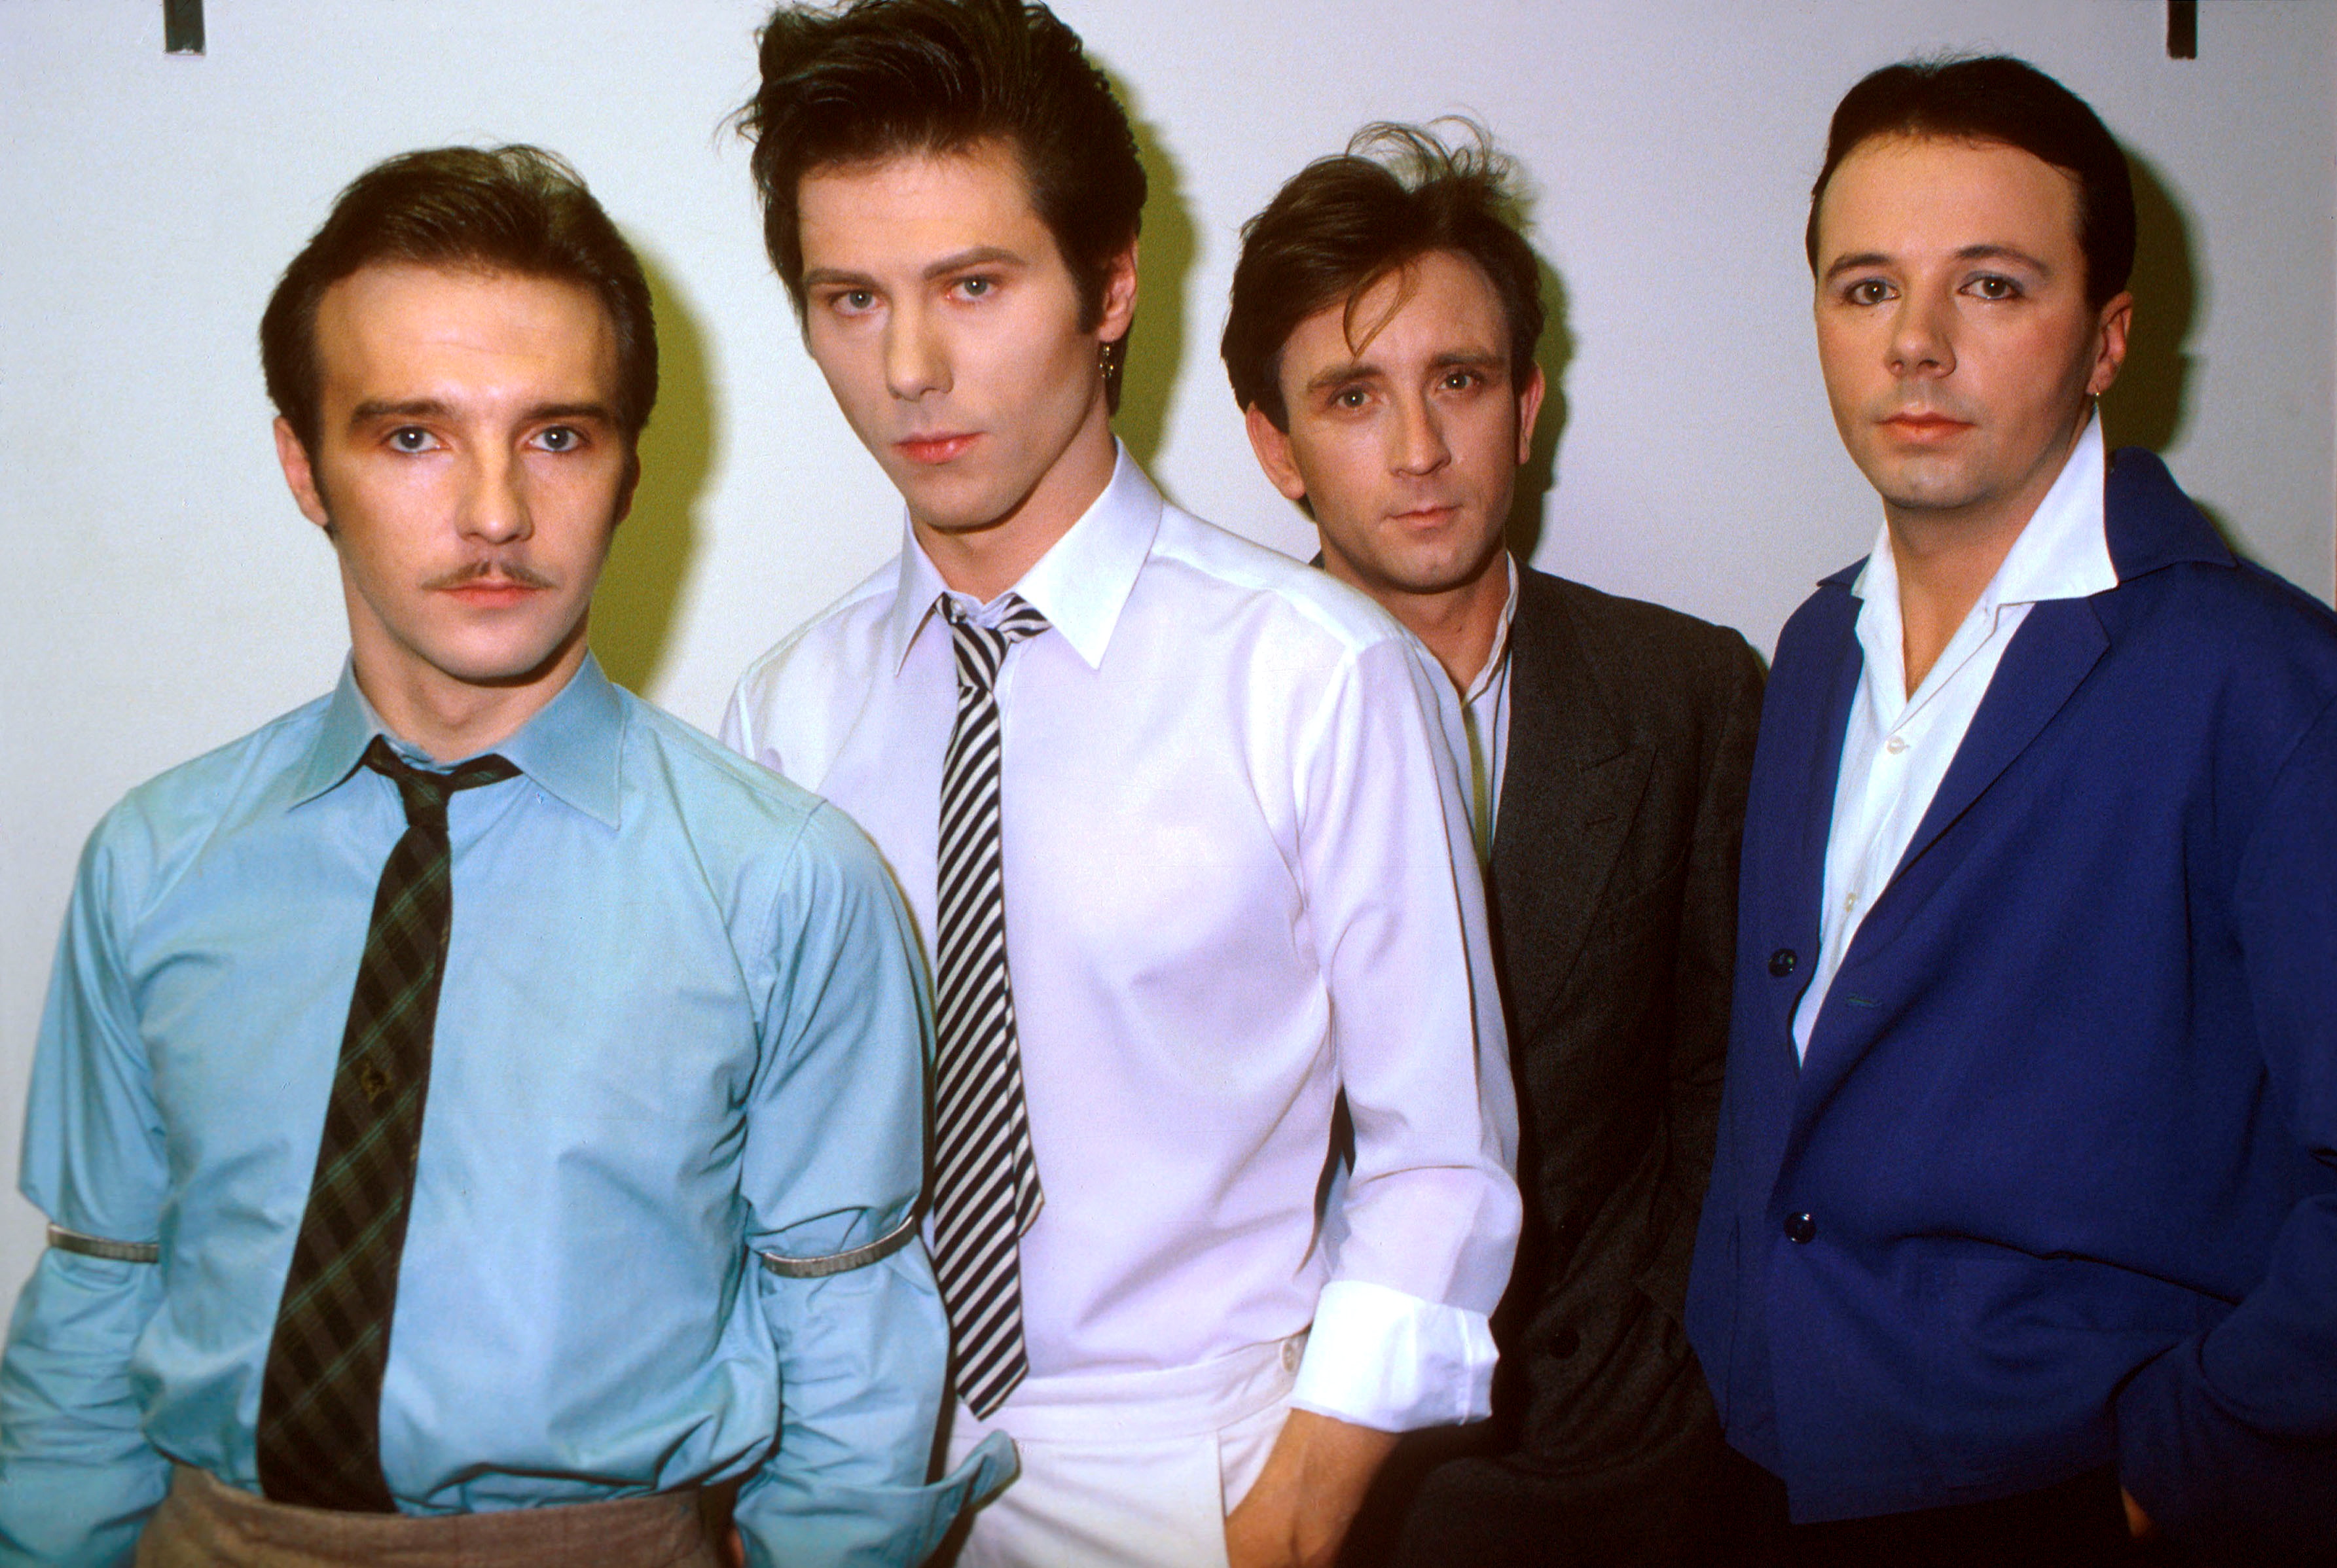 Ultravox pictured in the 1980s with Midge Ure, Warren Cann, Chris Cross, and Billy Currie